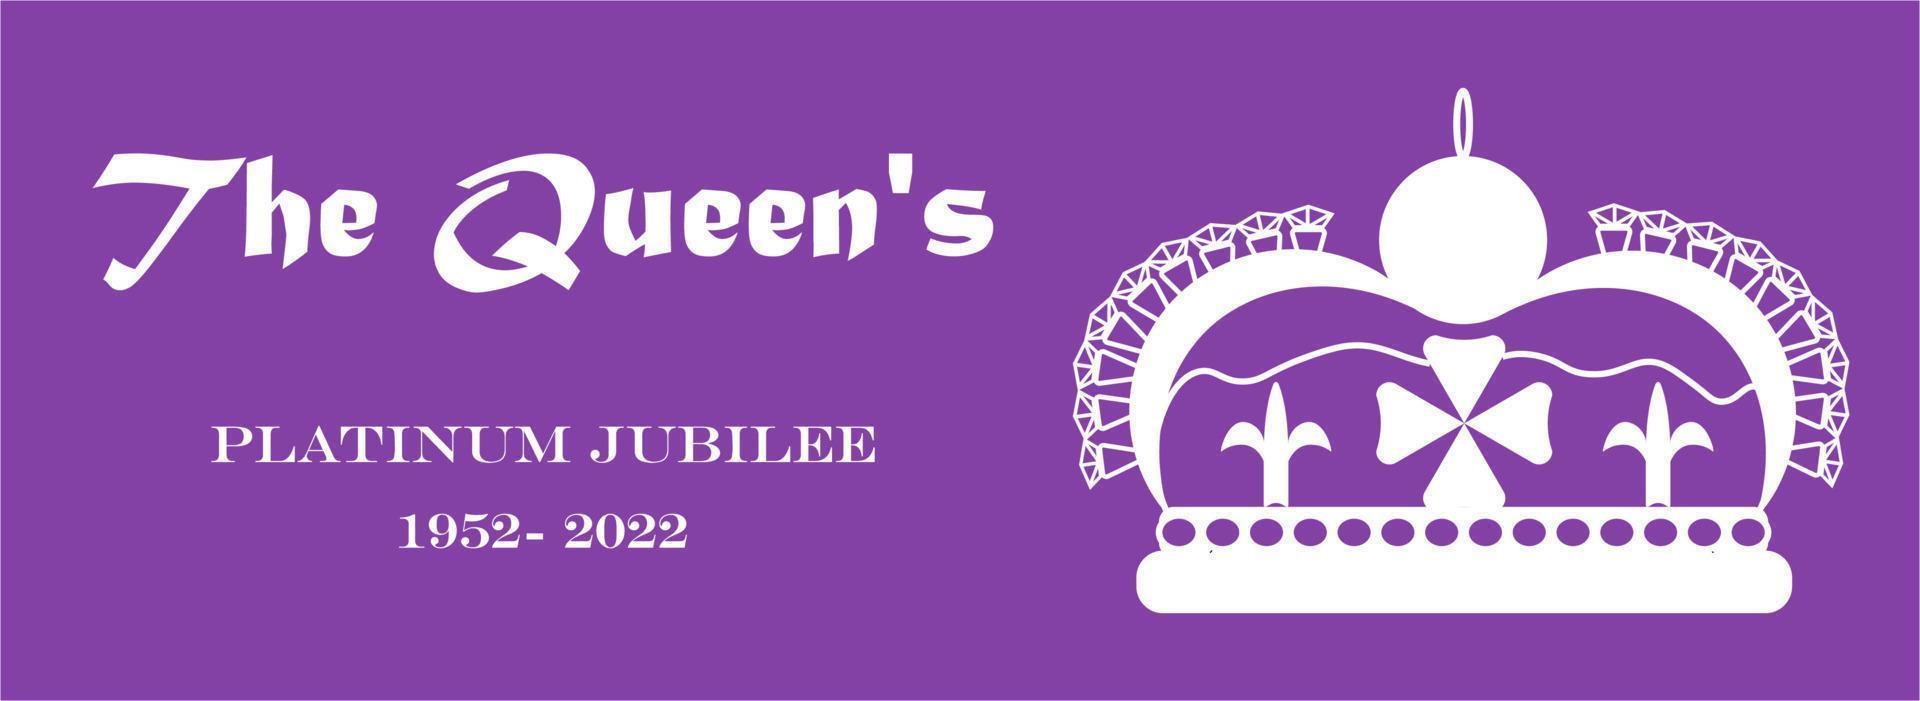 Banner the Queens Platinum Jubilee, 1952-2022. Vector illustration of the crown of about 70 years of service. design, covers, stickers, social networks, medals, badges, flyers, postcards, posters.